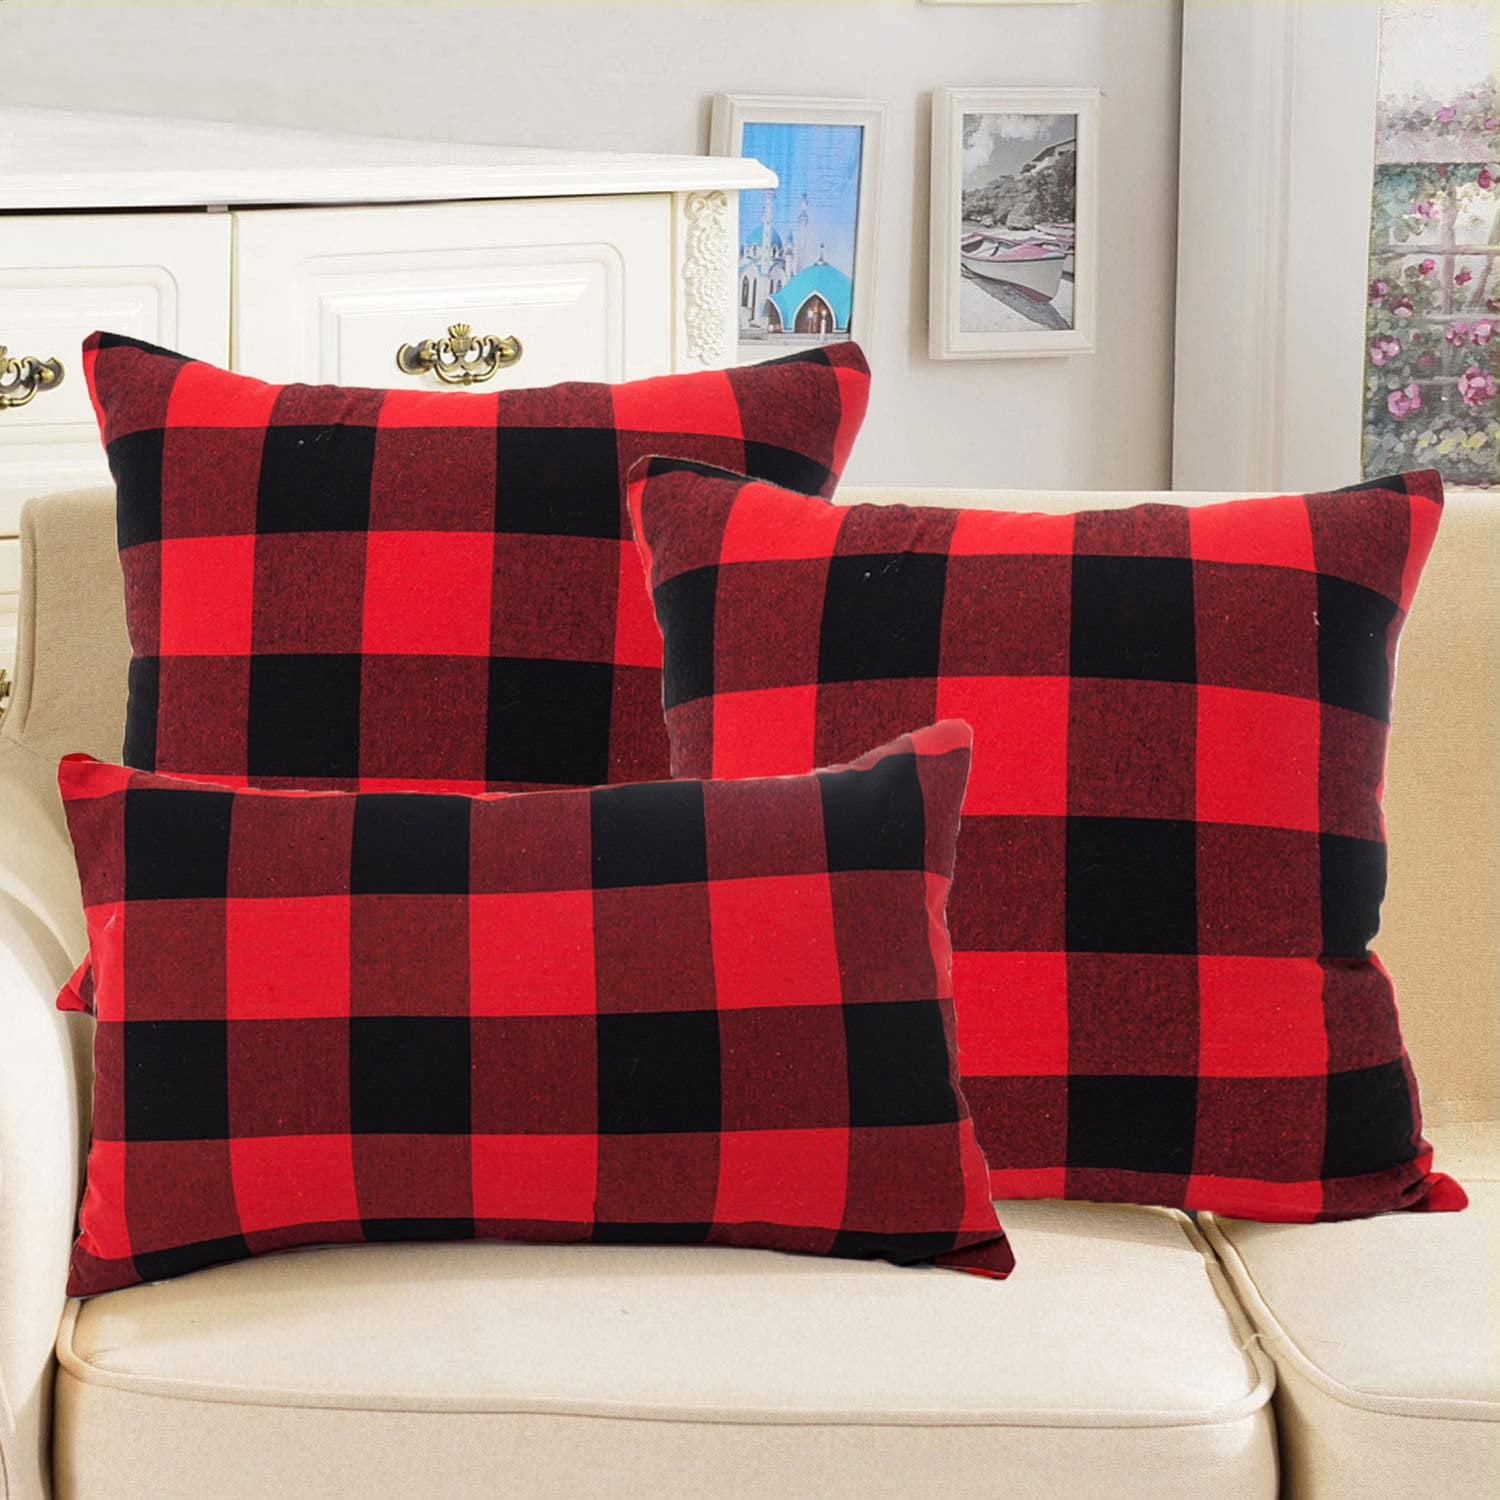 Jashem Plaid Throw Pillow Cover 18x18 inch Cotton Cushion Cover Black and Red Buffalo Check Pillow Case for Modern Home Decor Set of 2 (Big Plaid